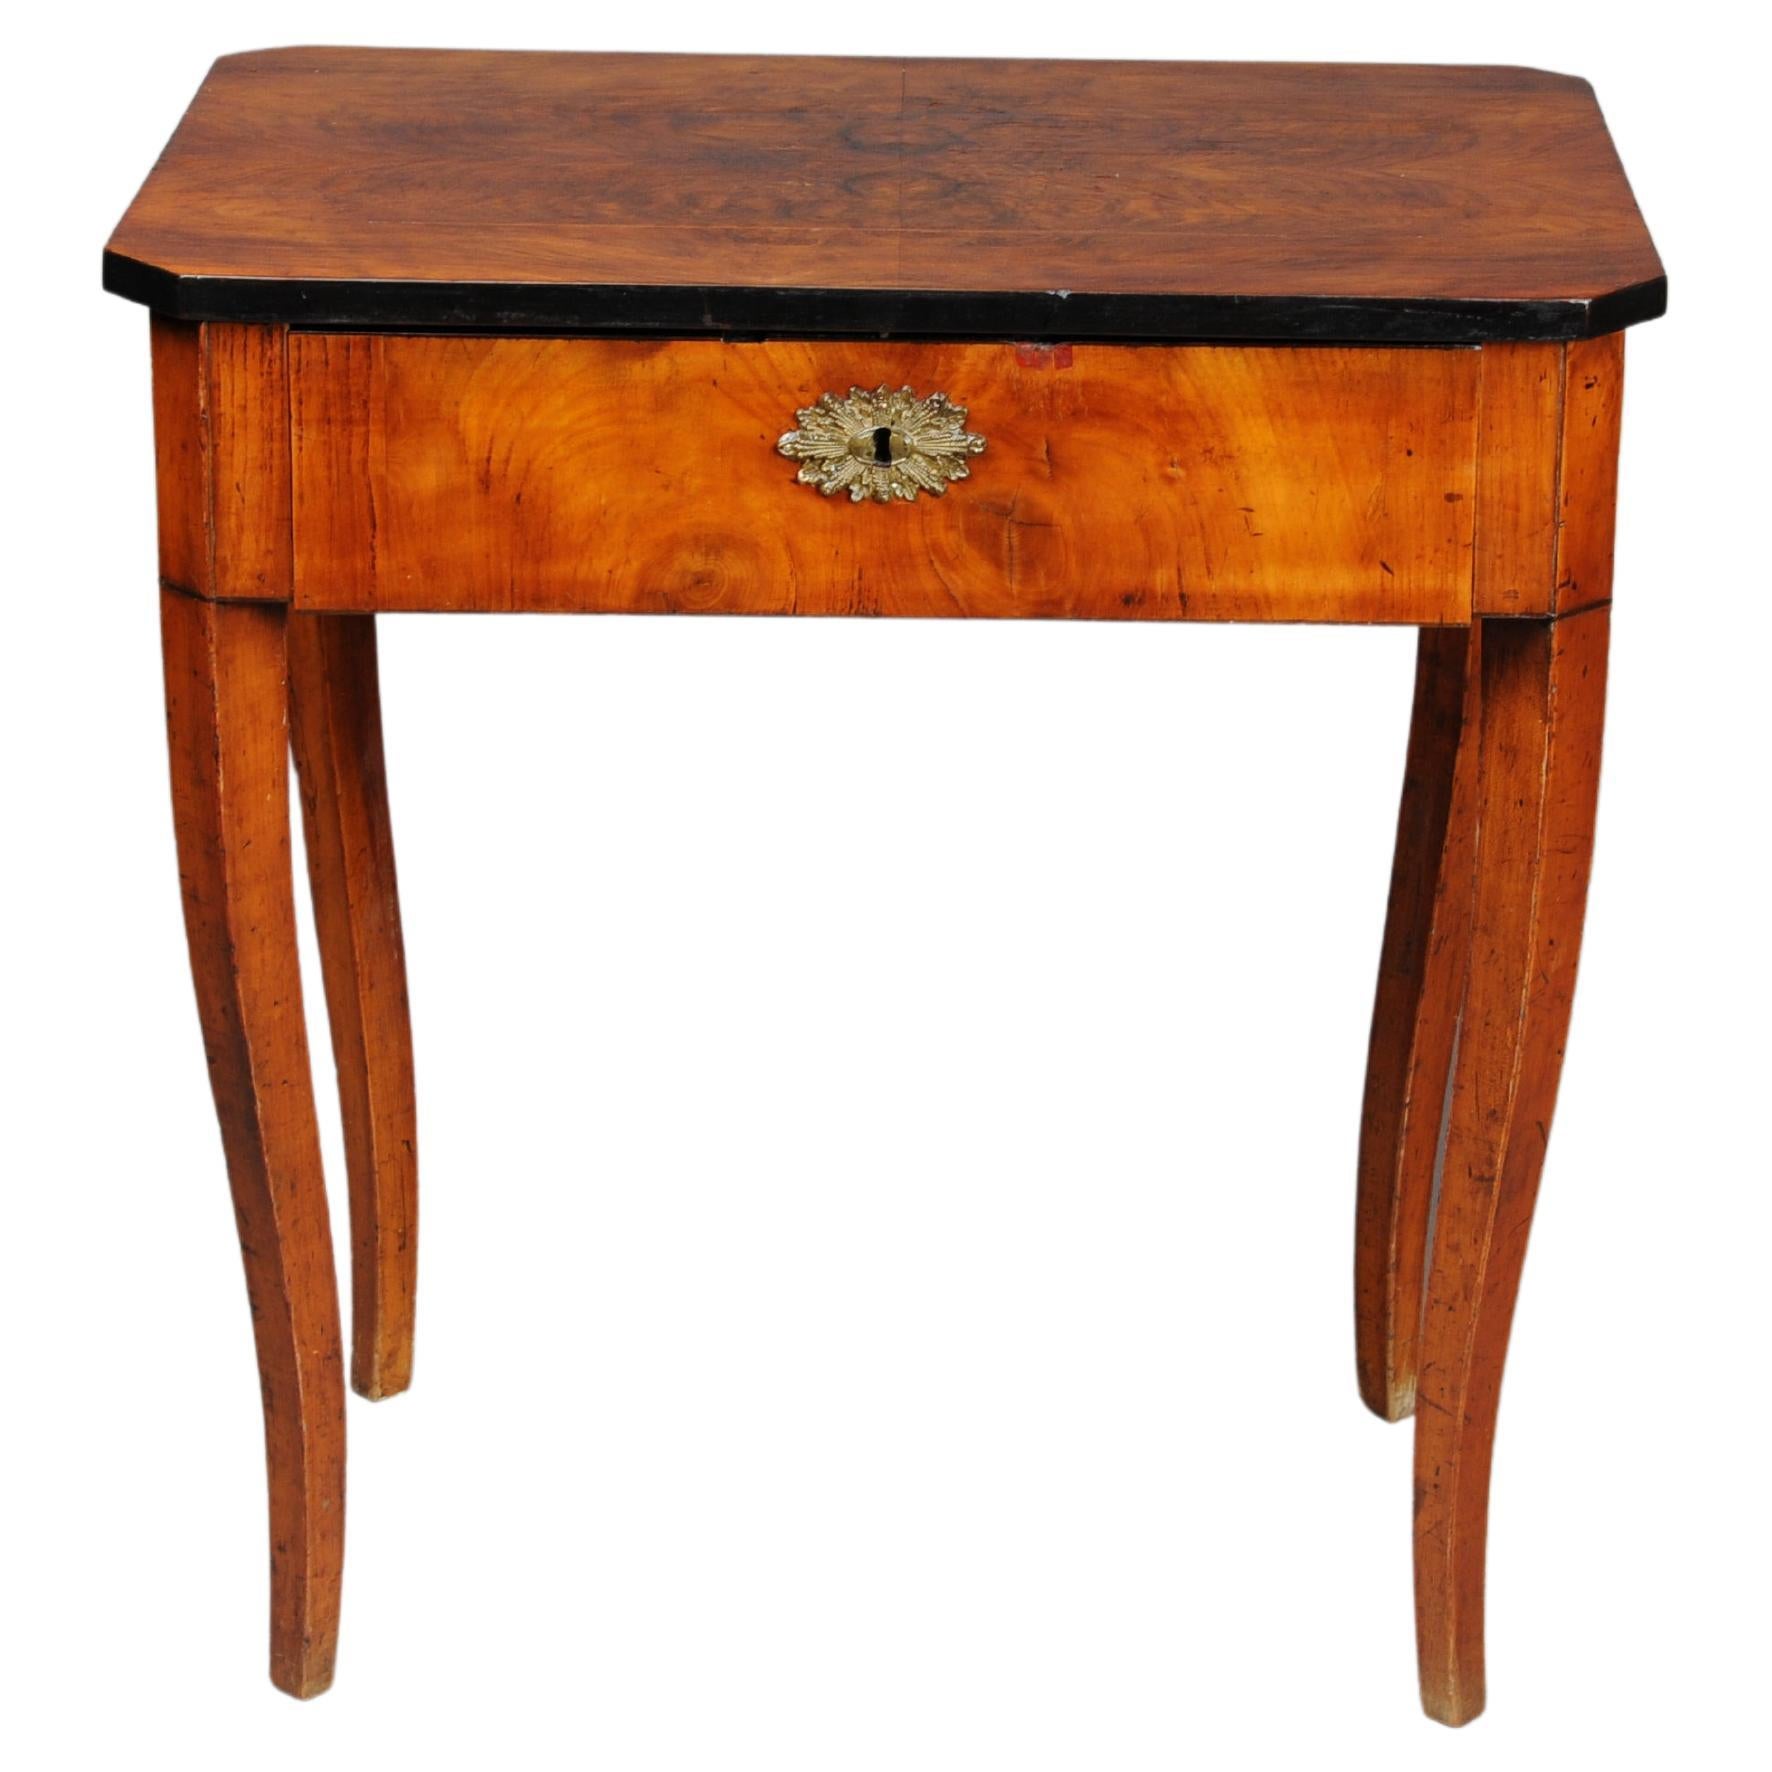 Beautiful side table/sewing table South German around 1860